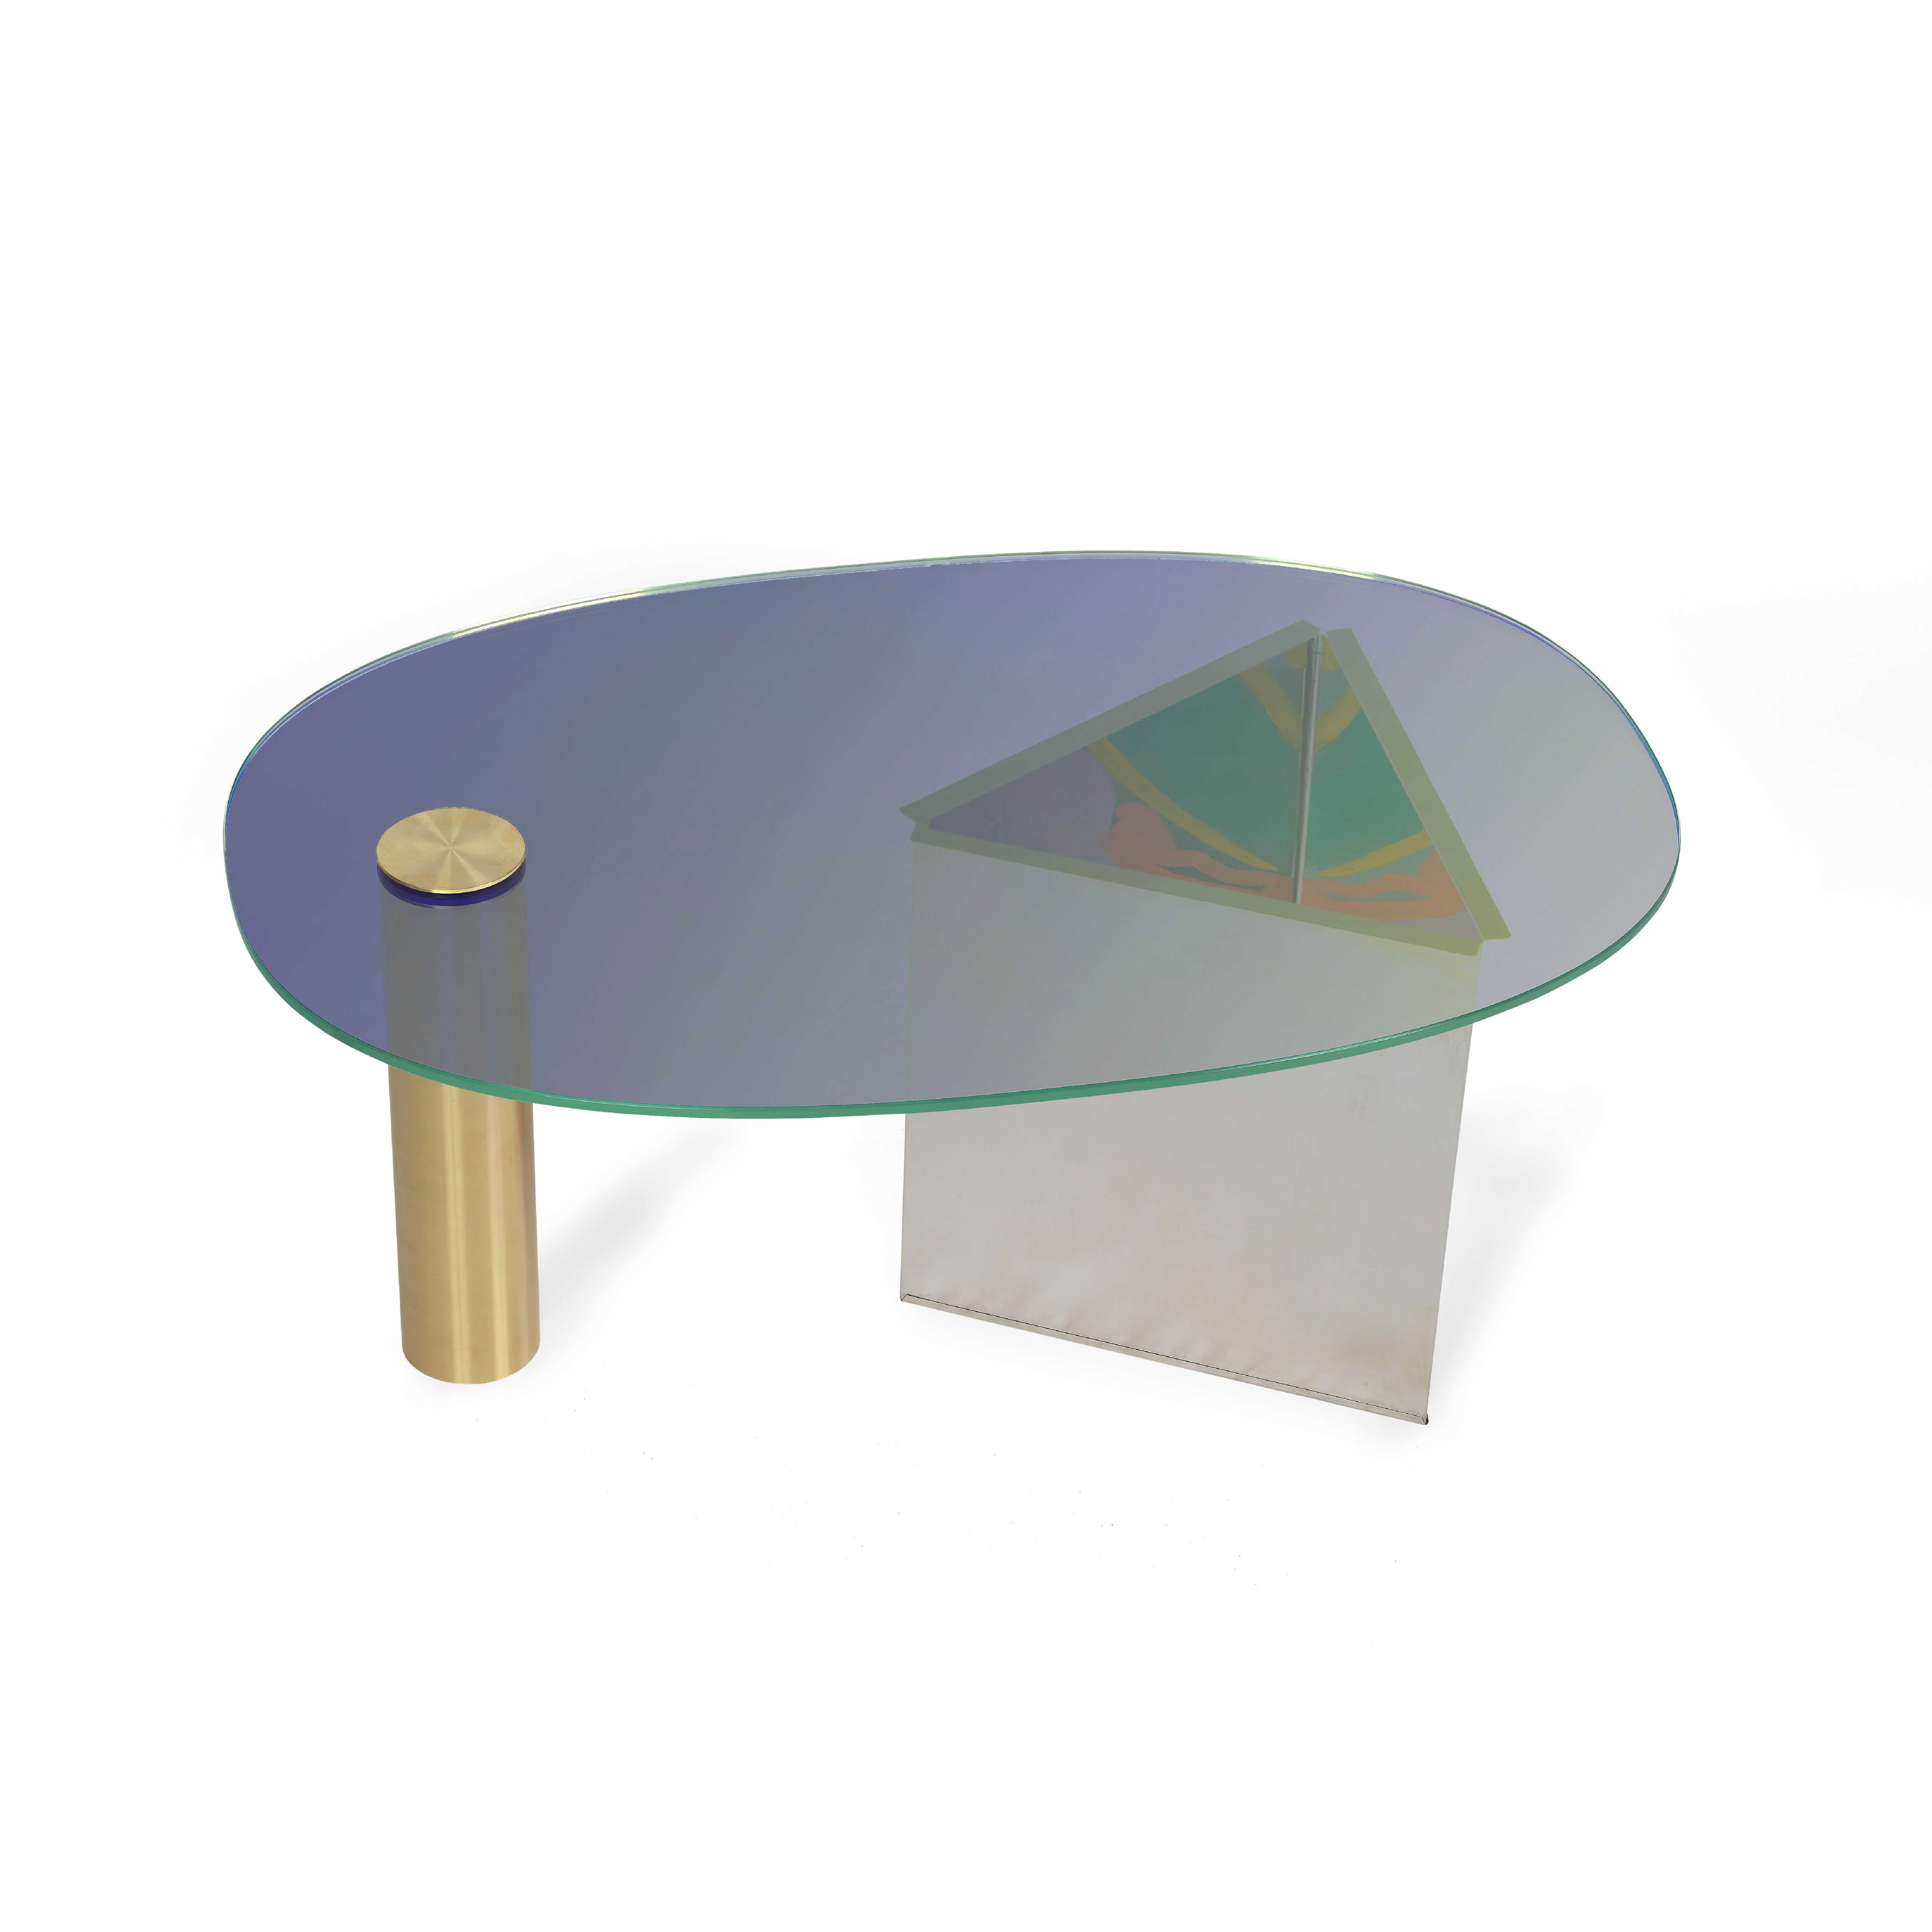 Ettore Blue Coffee Table by Asa Jungnelius
Dimensions: 43 x 67 x 100 cm
Materials: Dichroic glass, brass and stainless steel.

Each table is individually painted by the artist. Limited edition

Asa Jungnelius is a visual artist (MFA) and a